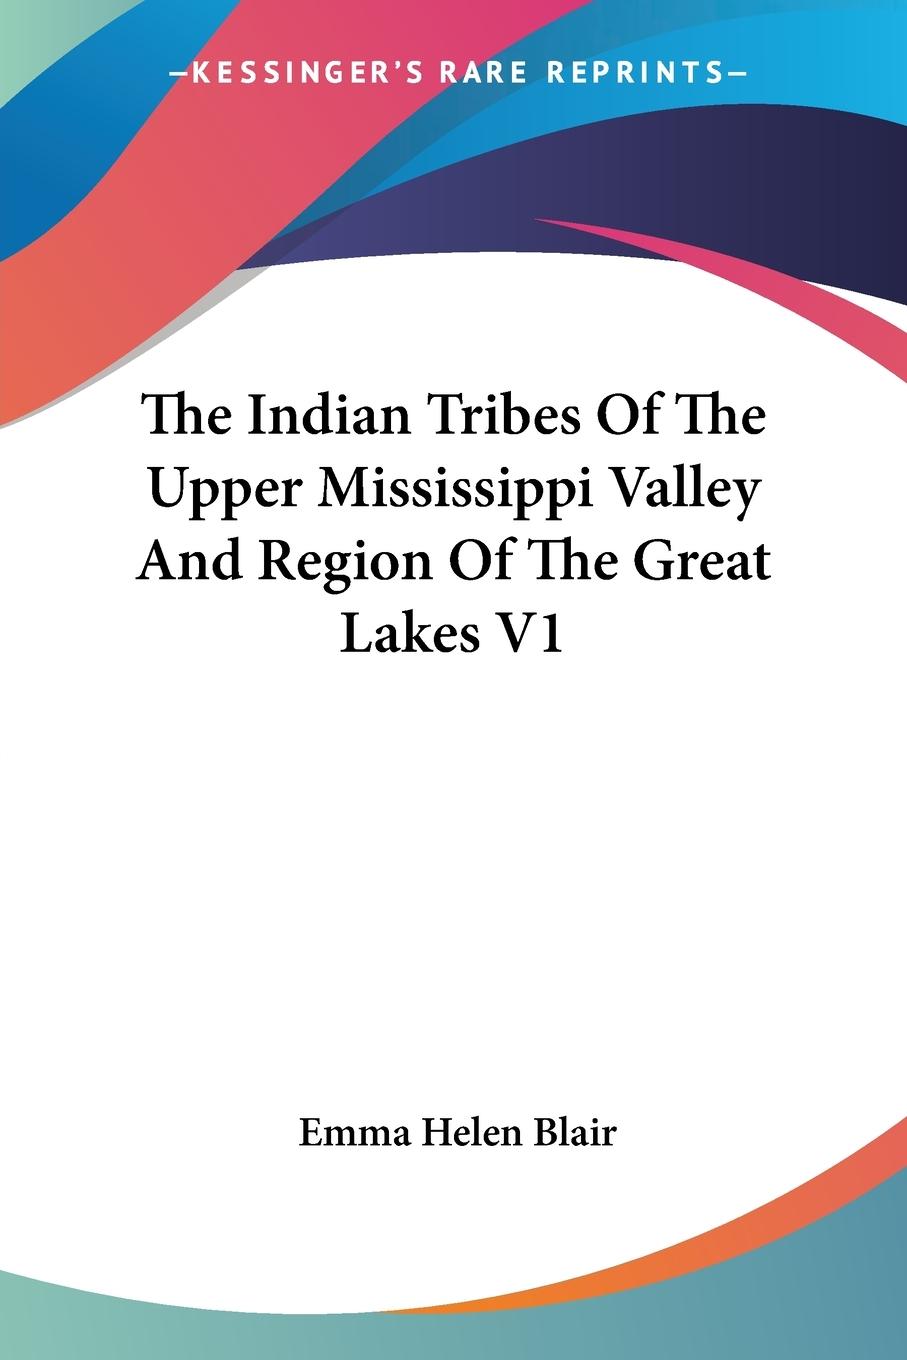 The Indian Tribes Of The Upper Mississippi Valley And Region Of The Great Lakes V1